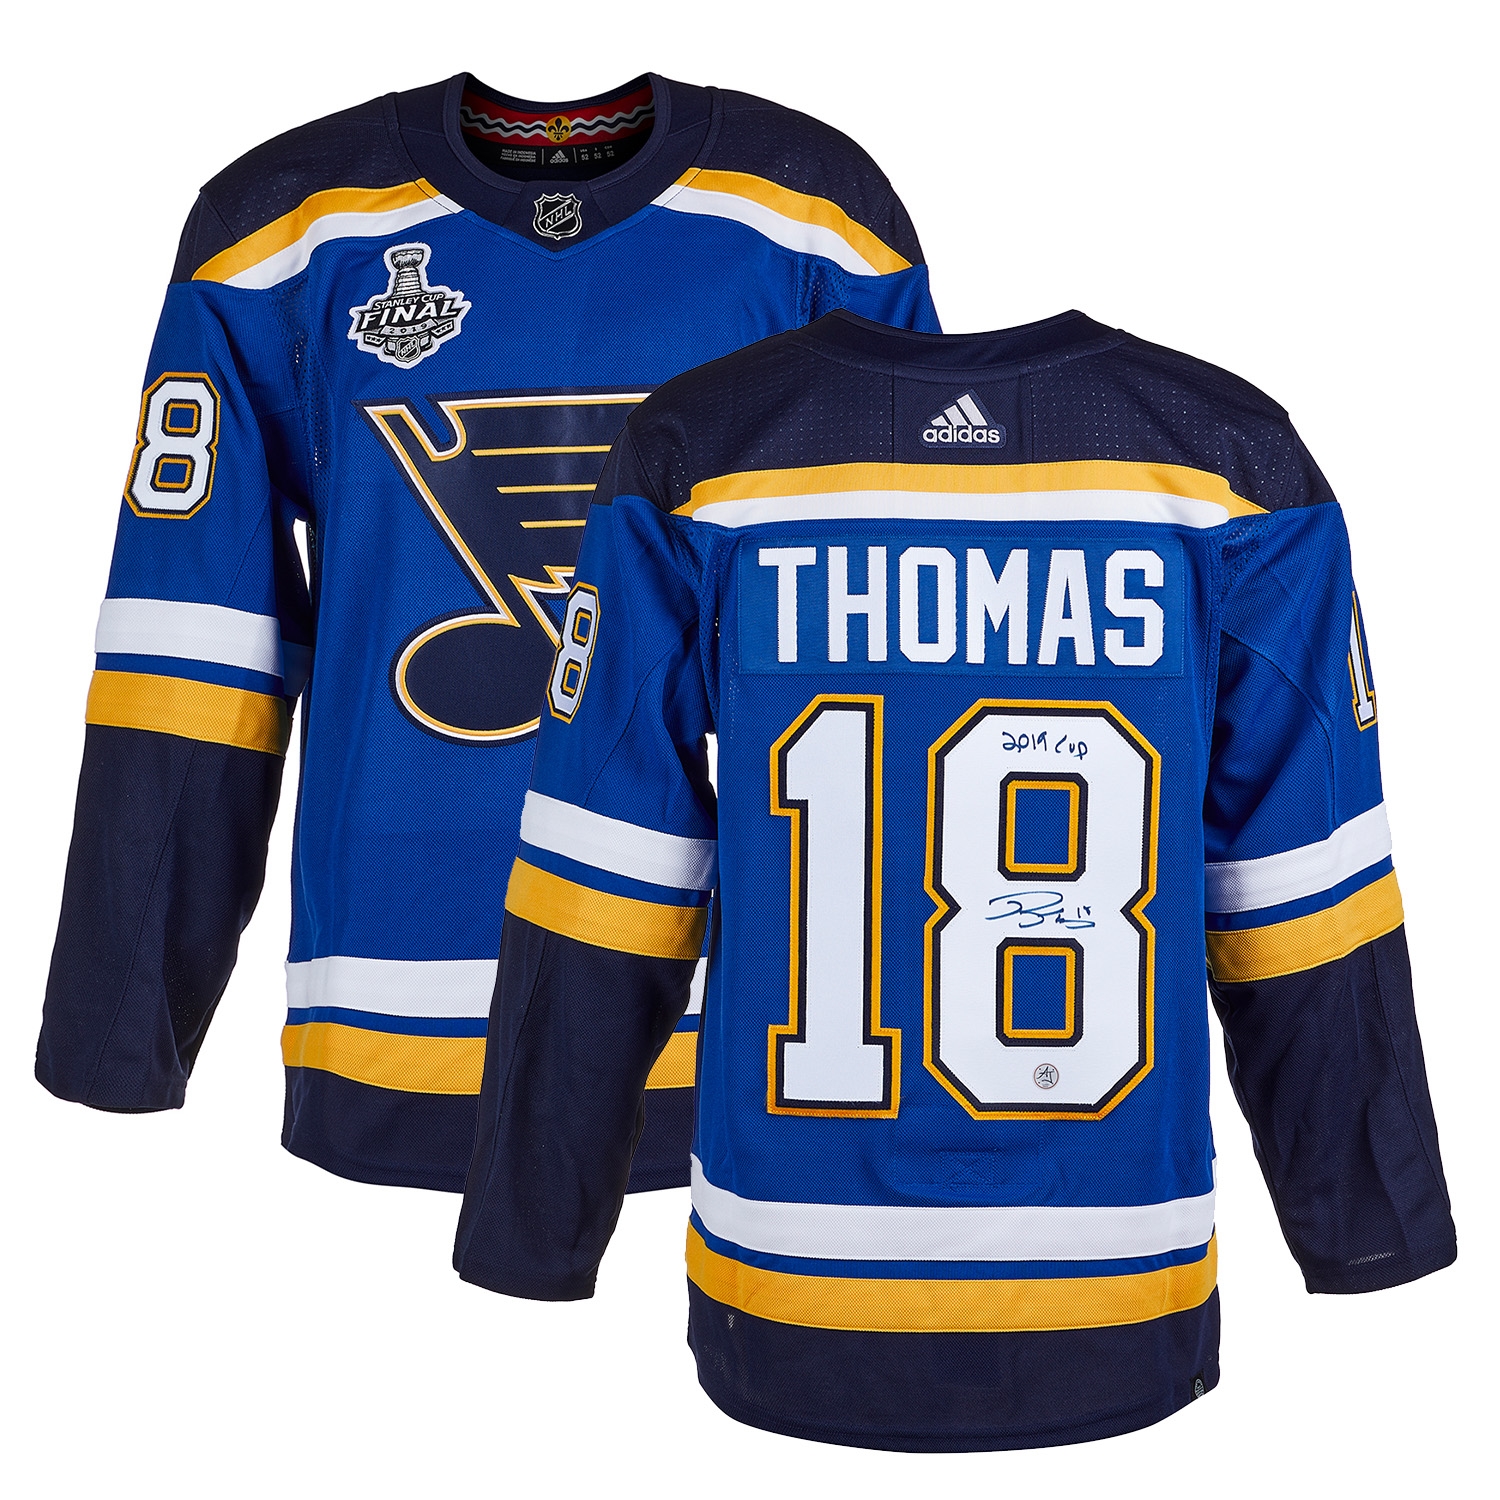 Robert Thomas Signed St Louis Blues 2019 Stanley Cup adidas Jersey